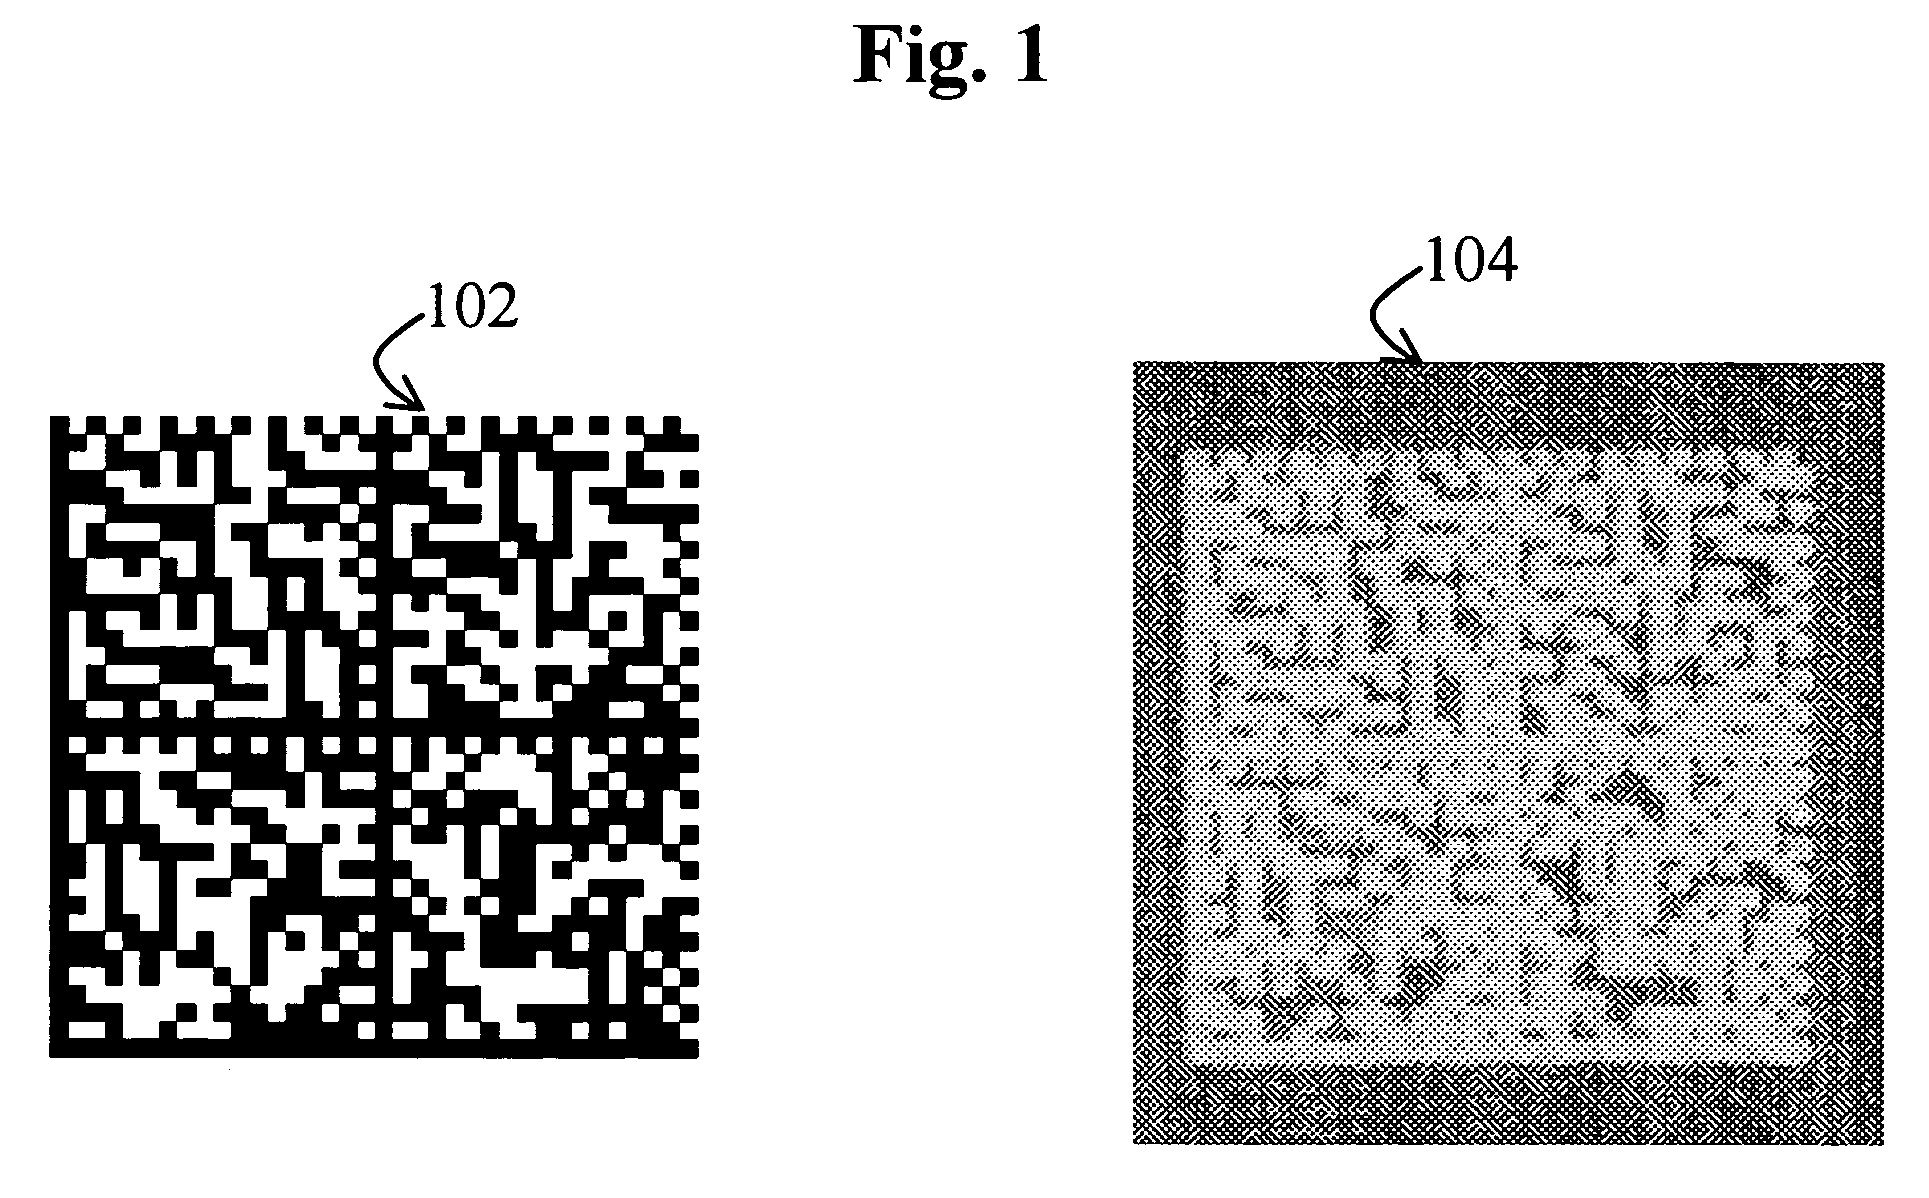 IR absorbing photosensitive optically variable ink compositions and process